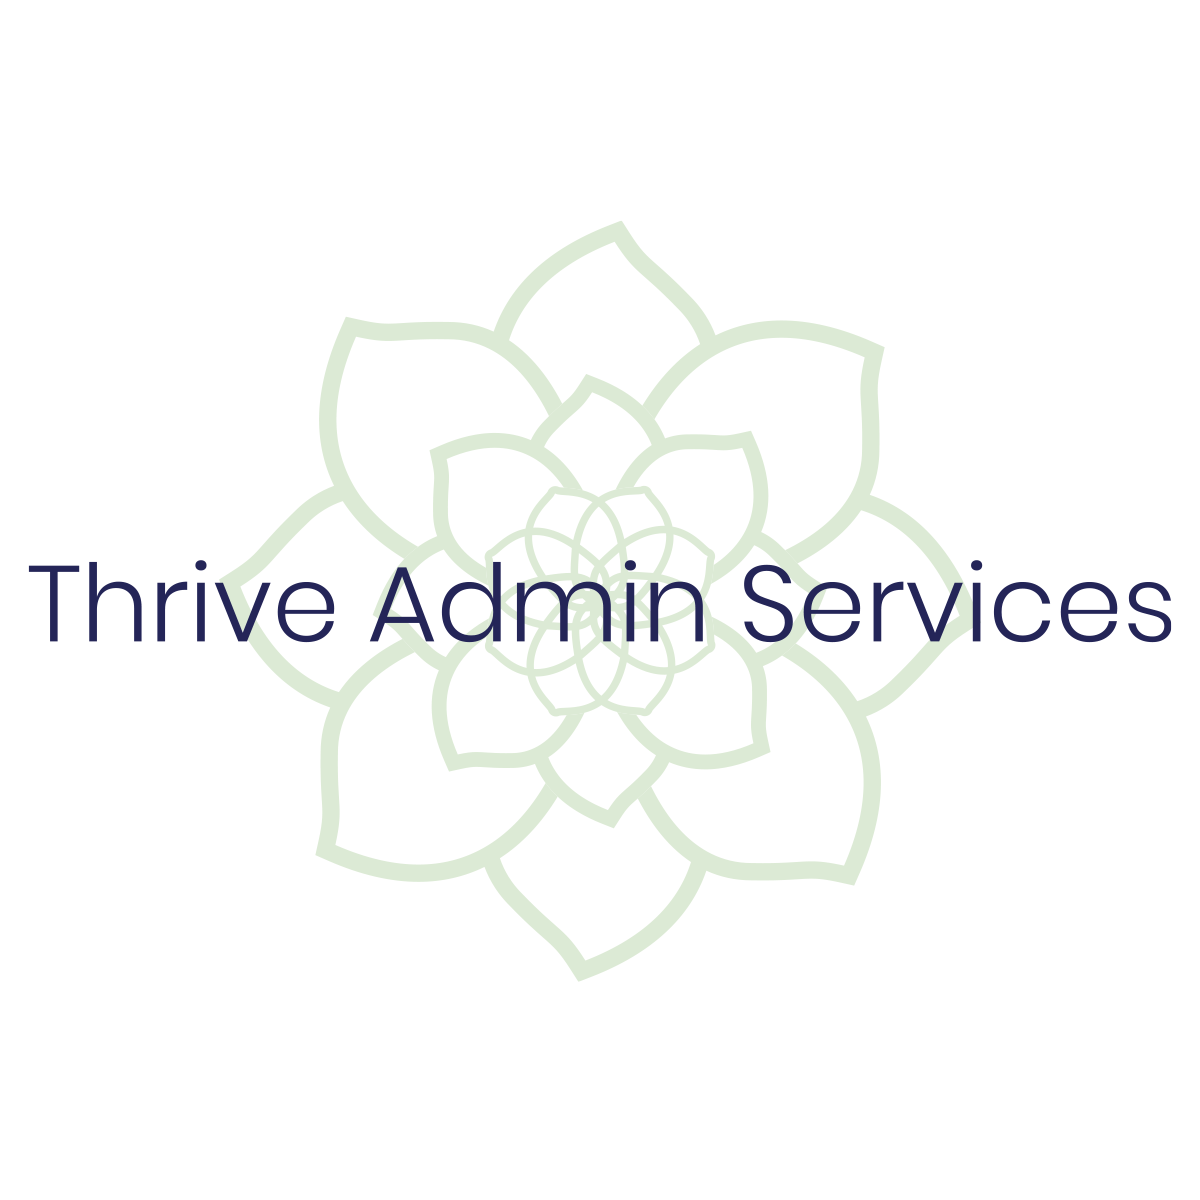 Thrive Admin Services